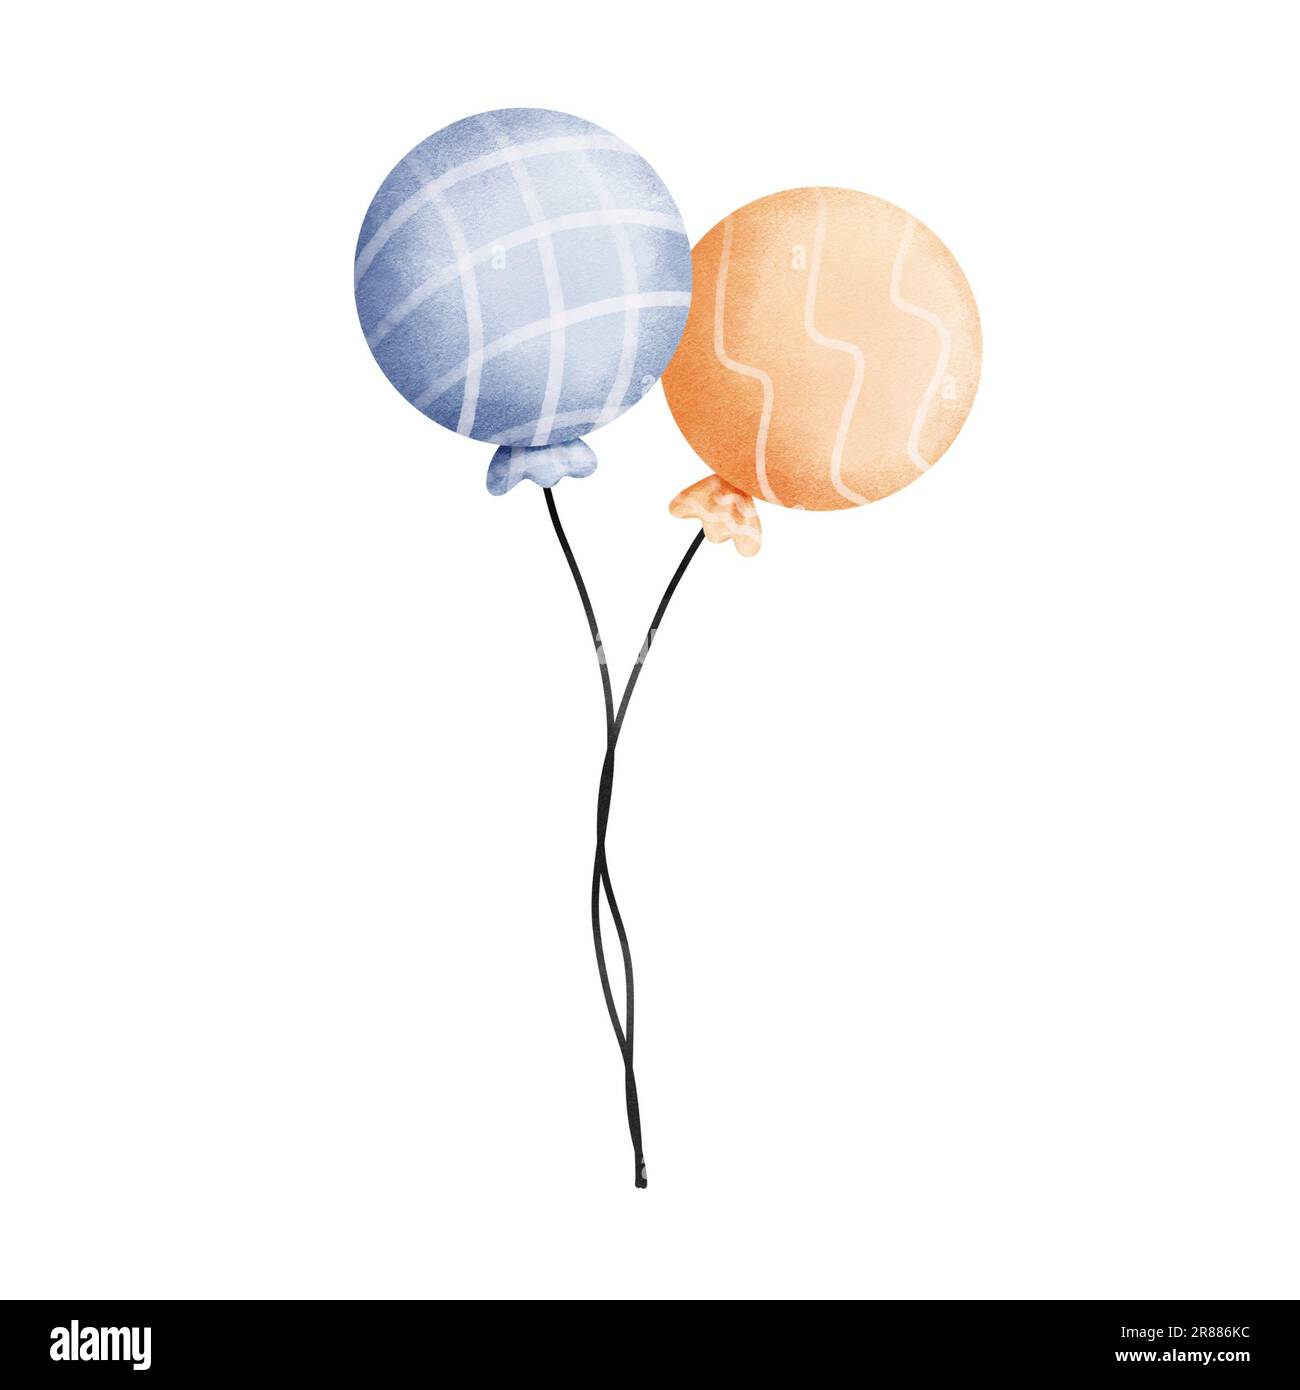 Watercolor blue and orange balloons illustration isolated on white background. Halloween balloons,christmas,birthday,etc. Stock Photo